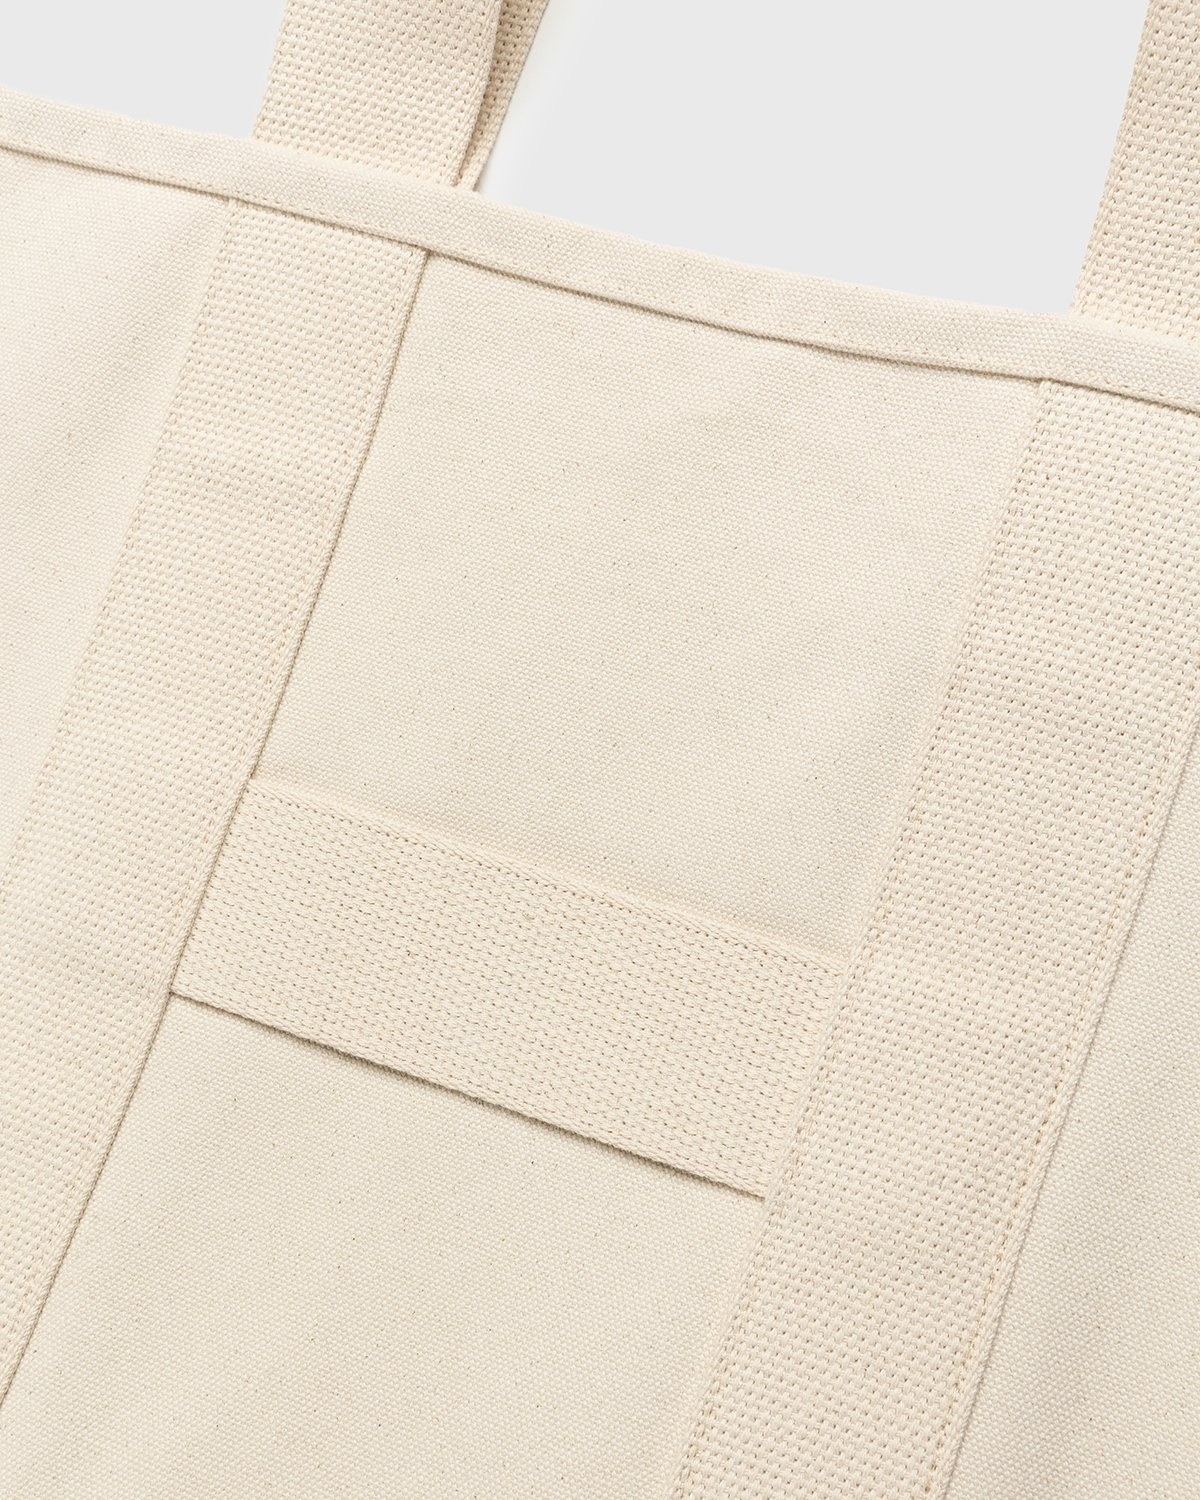 Highsnobiety – XL Canvas "H" Tote Natural - Bags - Beige - Image 4